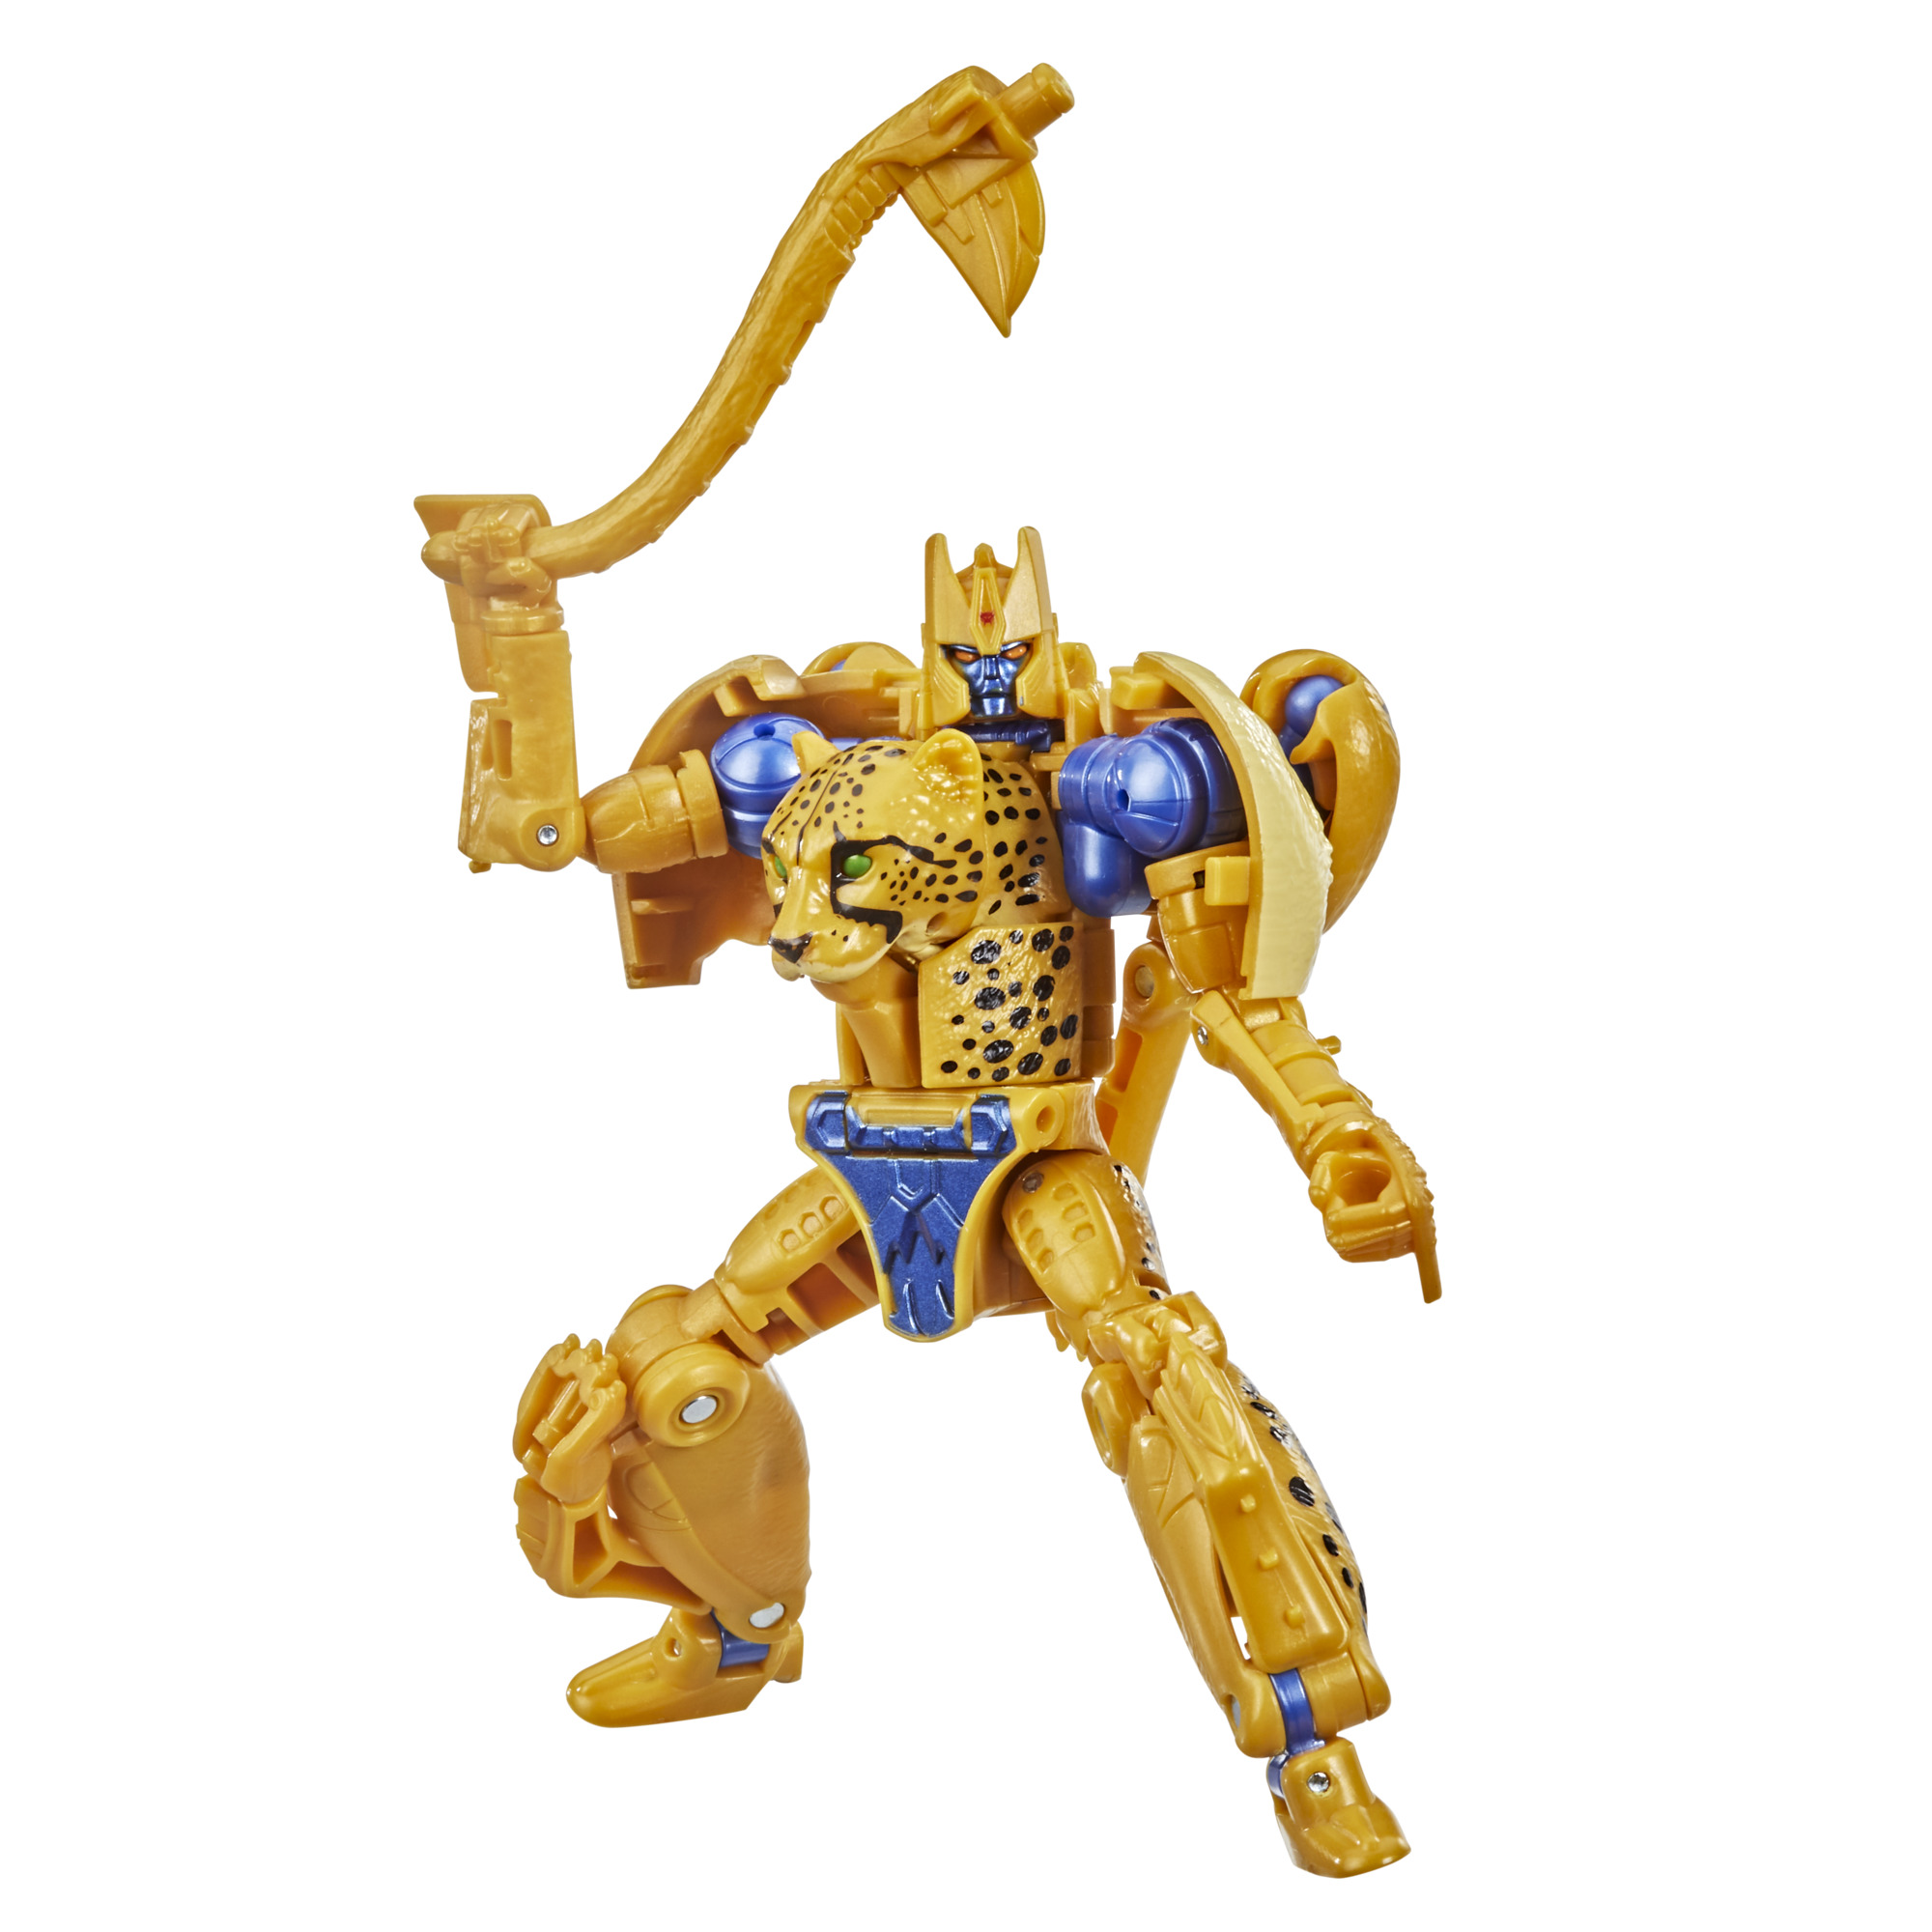 Transformers: War for Cybertron Cheetor Kids Toy Action Figure for Boys and Girls - image 1 of 7